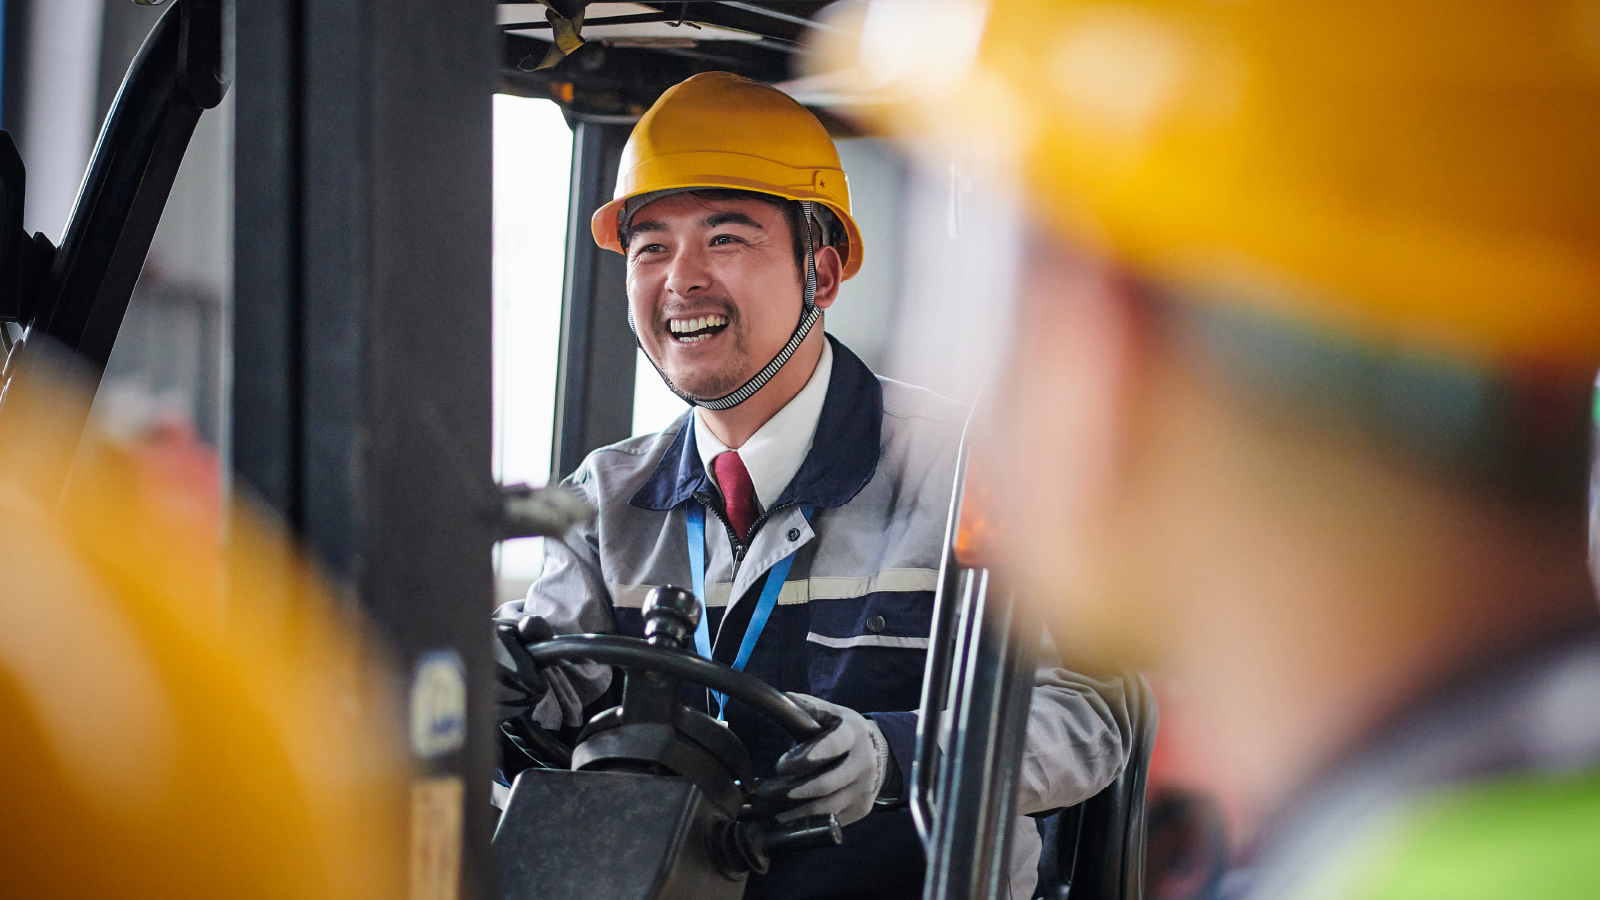 A man smiling driving a fork lift